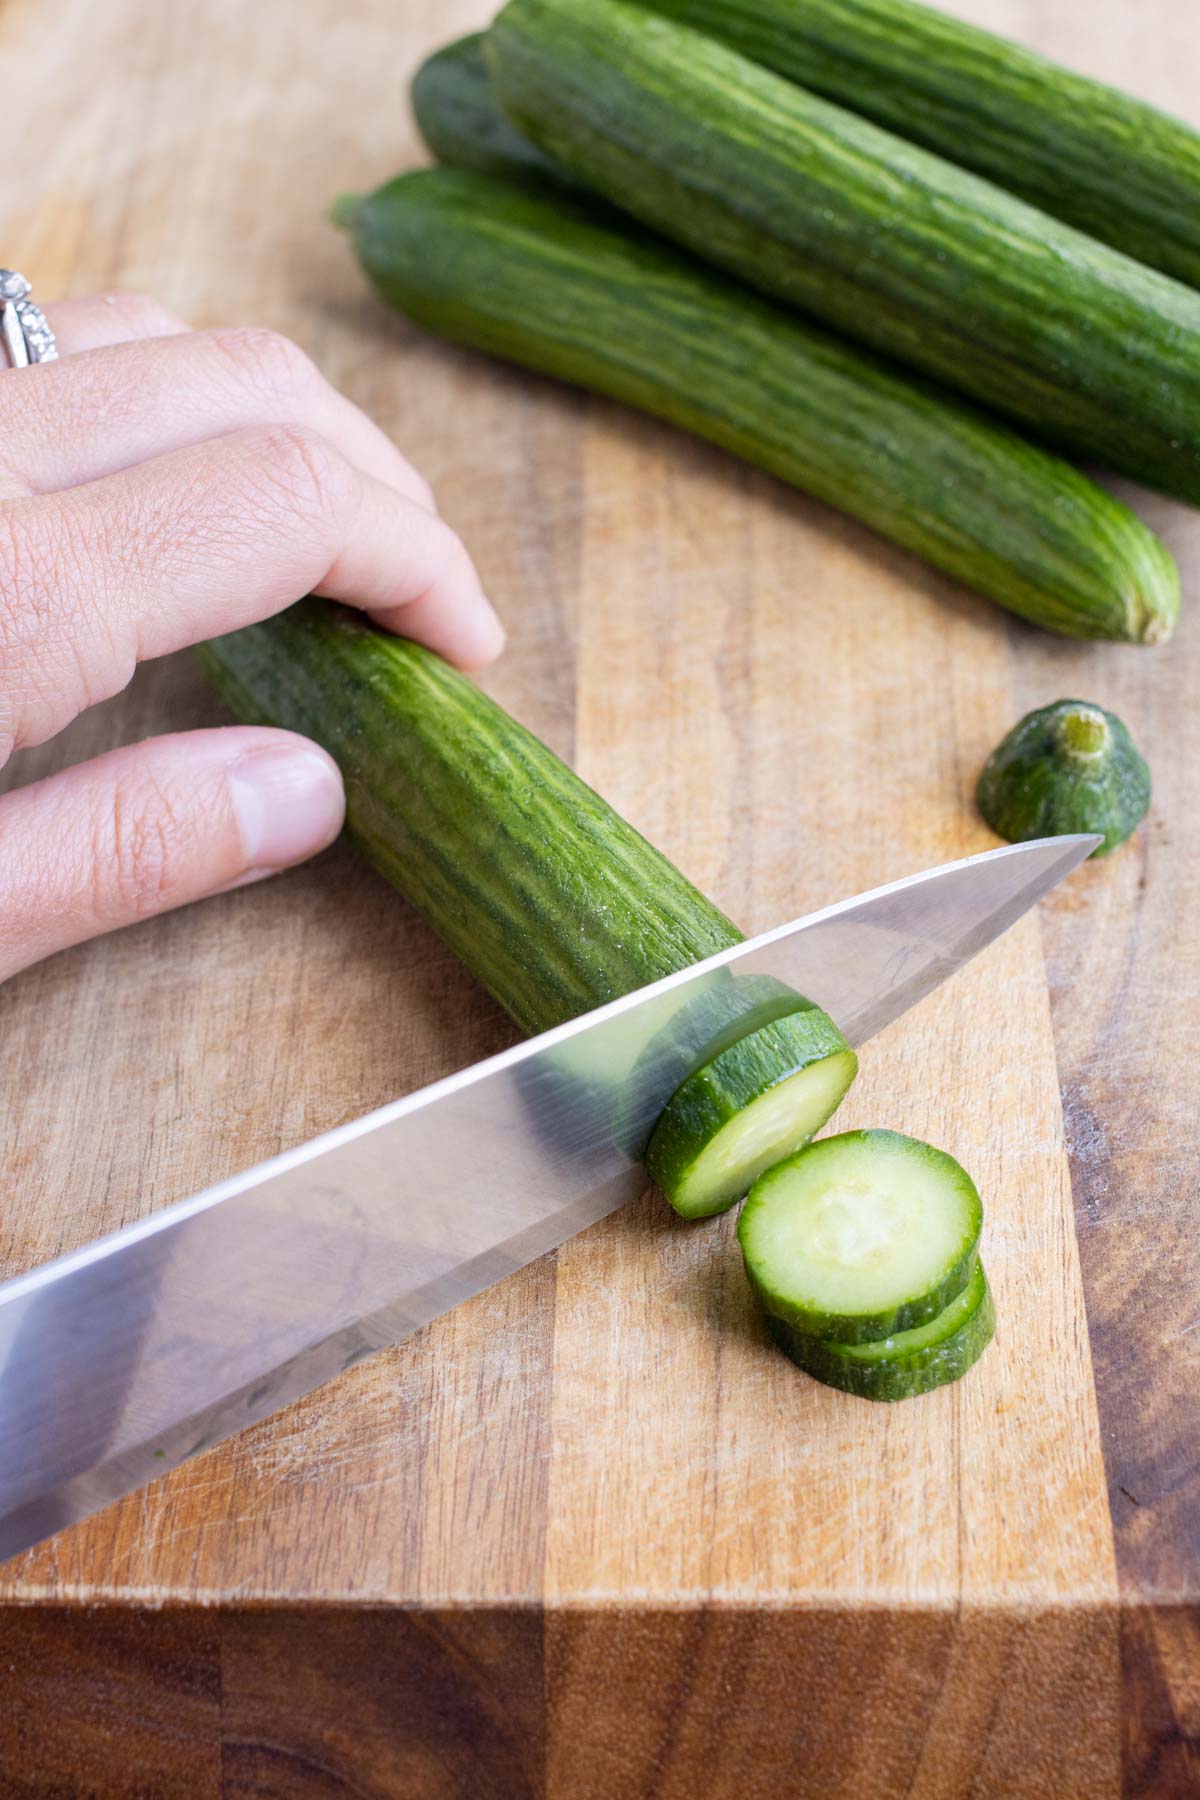 A cucumber is cut into ¼-inch thick slices on a wooden cutting board.